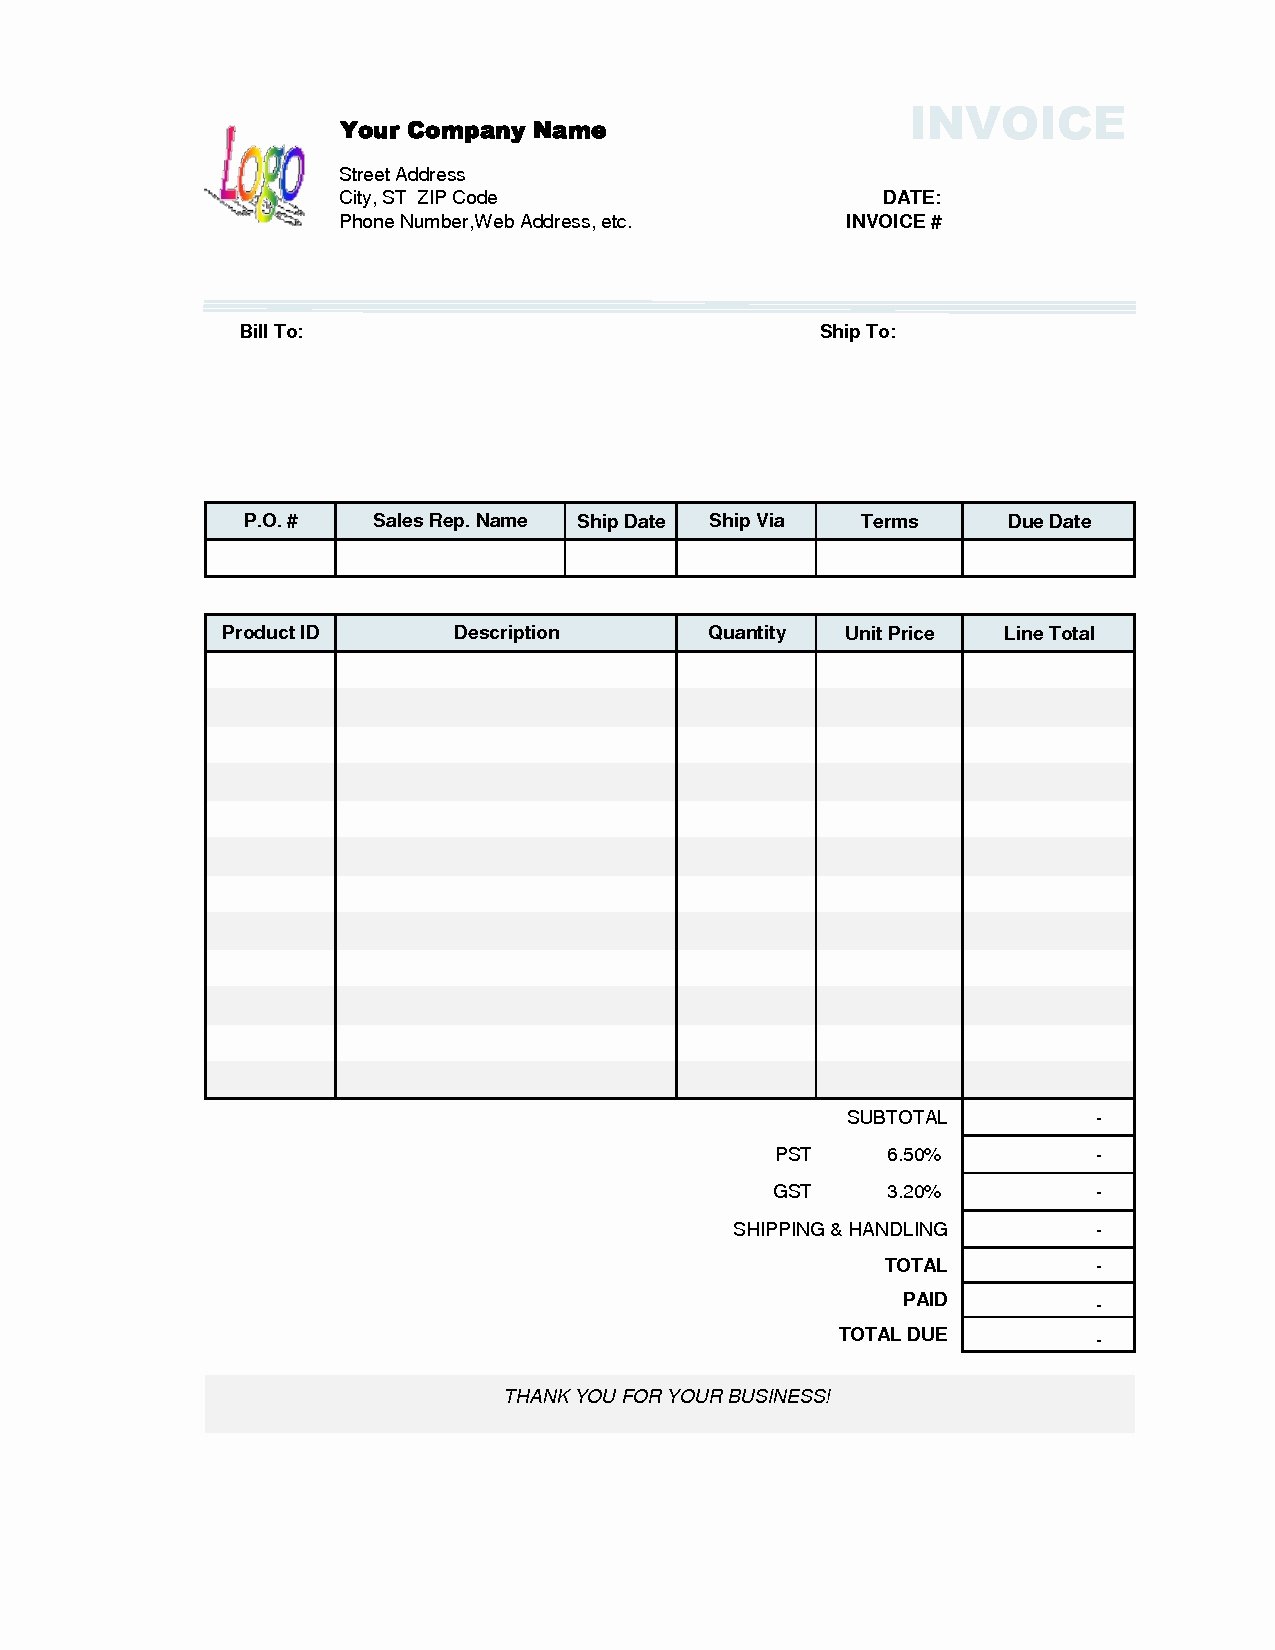 Small Business Invoice Template Elegant Small Business Invoice software Reviews Invoice Template